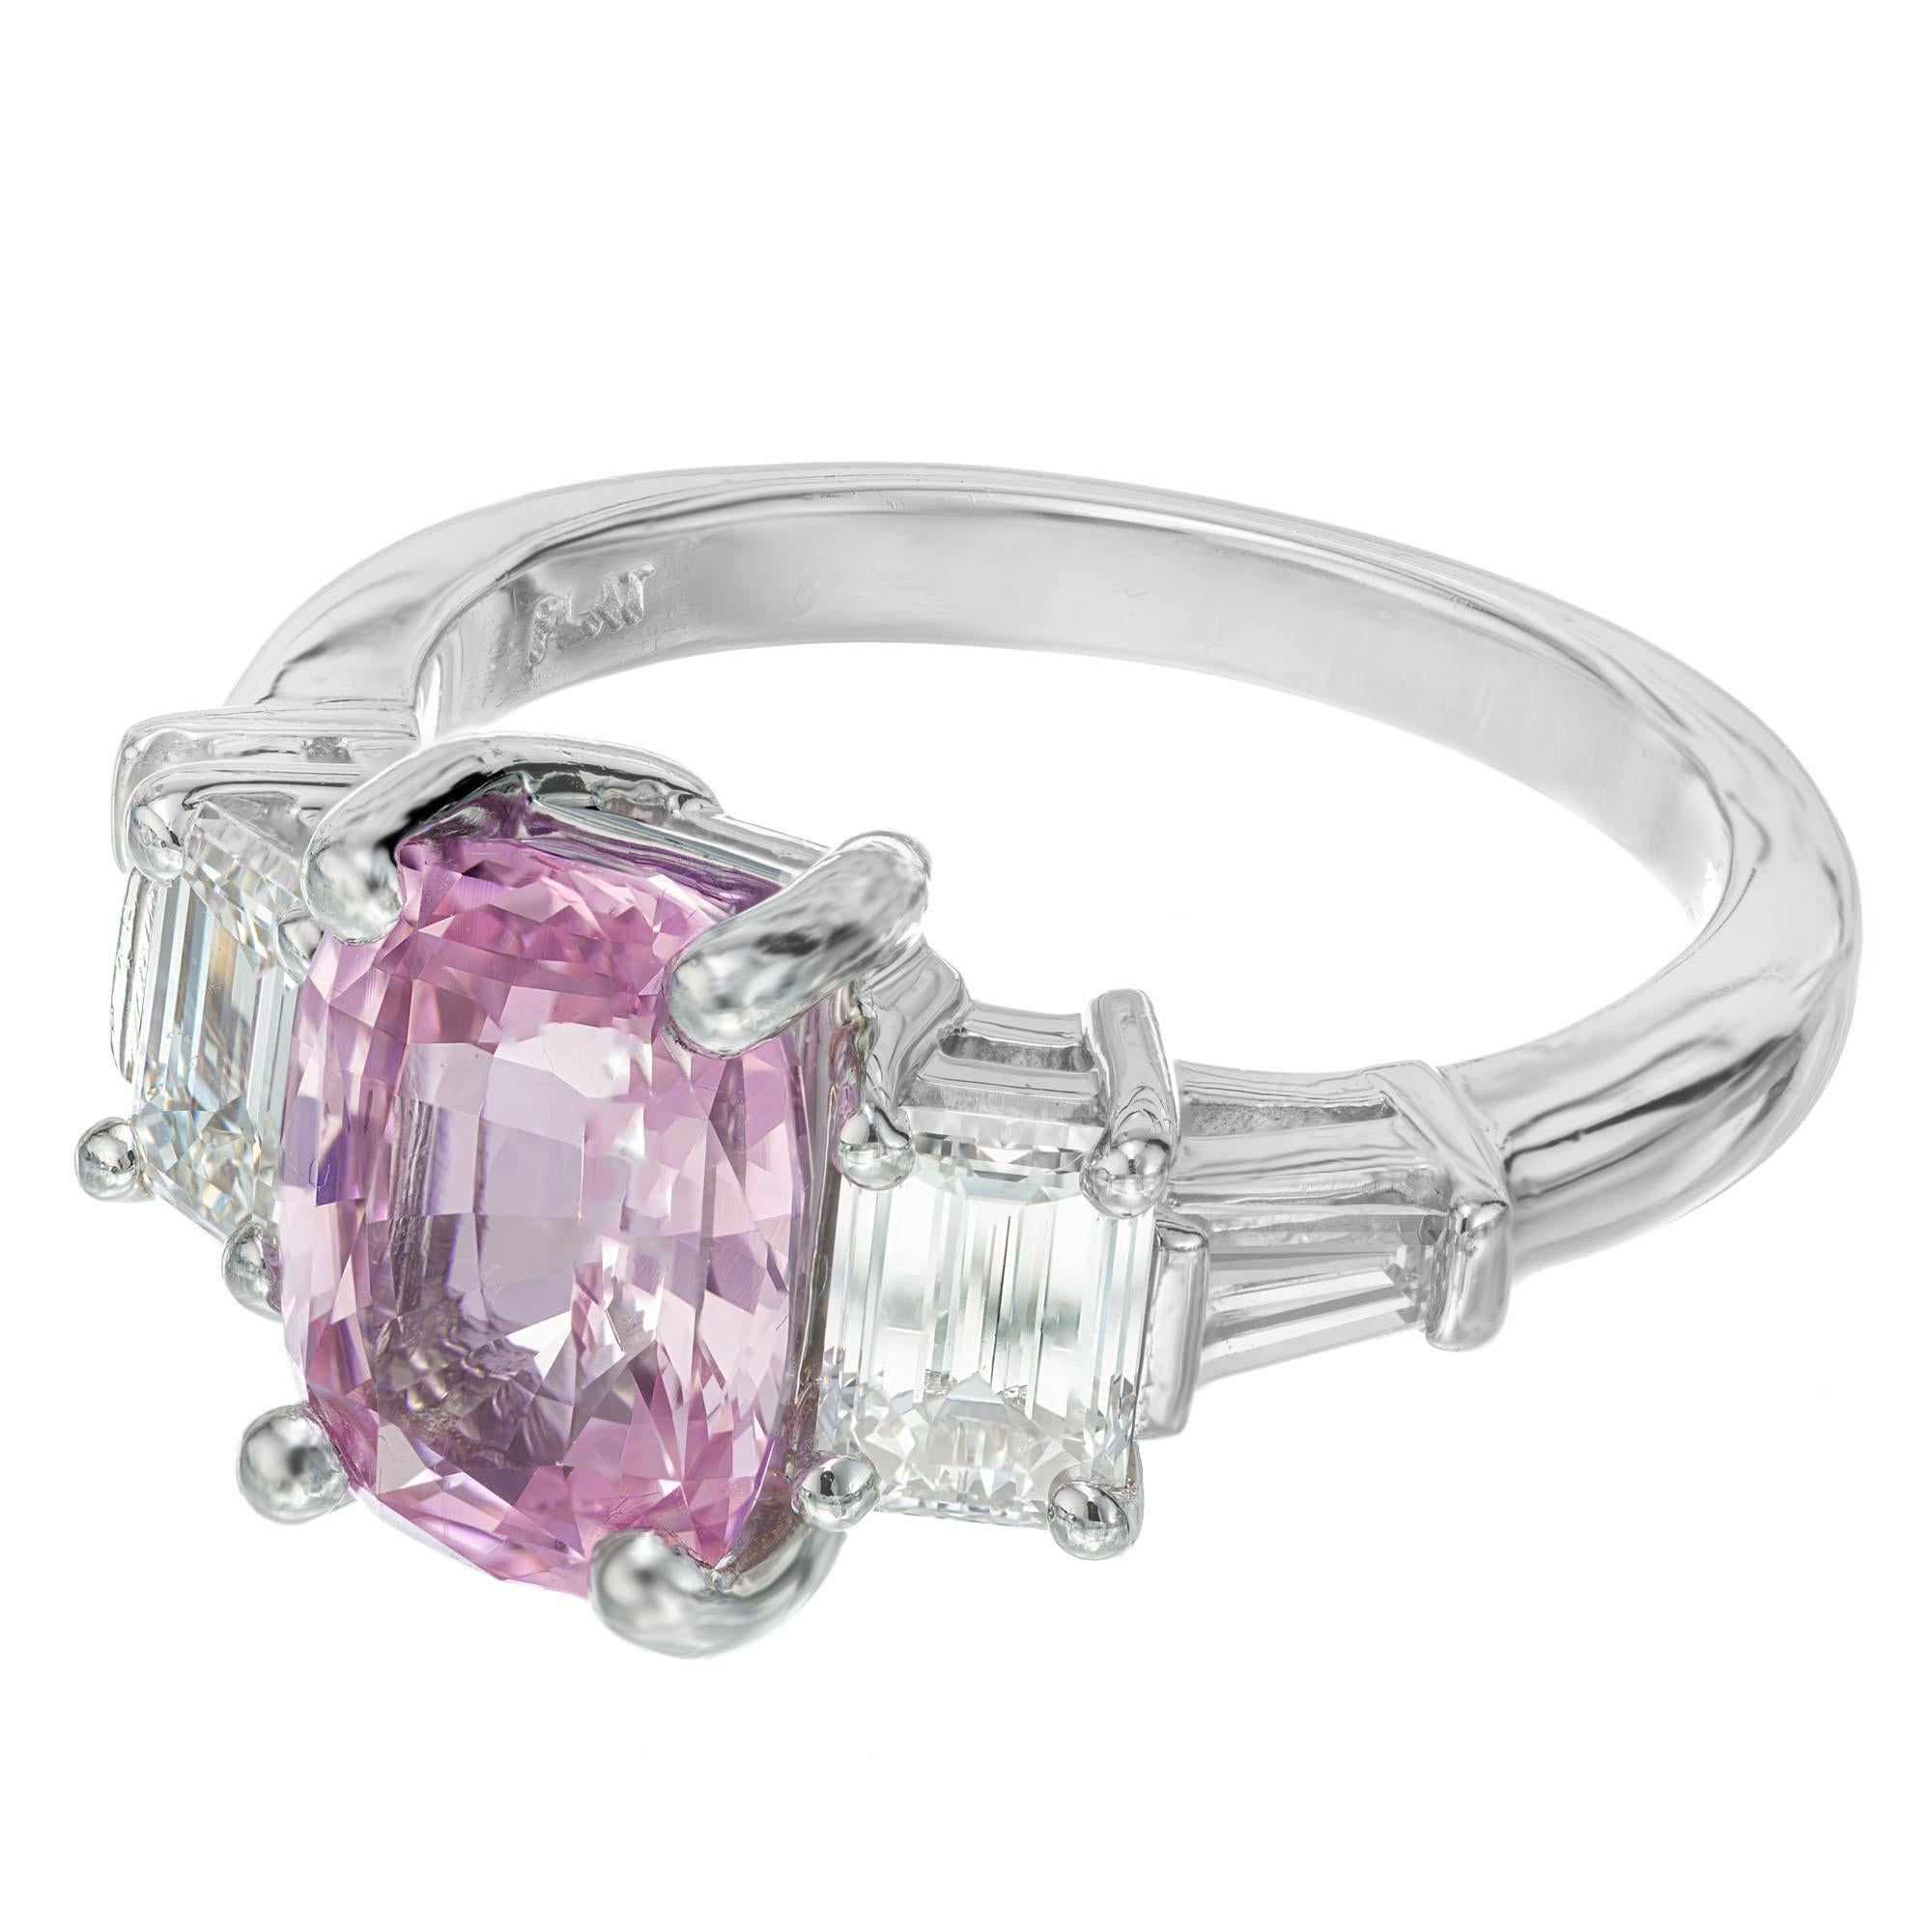 Natural purple pink sapphire and diamond engagement ring. GIA certified natural, untreated cushion cut center Sapphire in a platinum setting with 2 emerald and 2 tappered baguette side diamonds. The ring was designed in the Peter Suchy Design